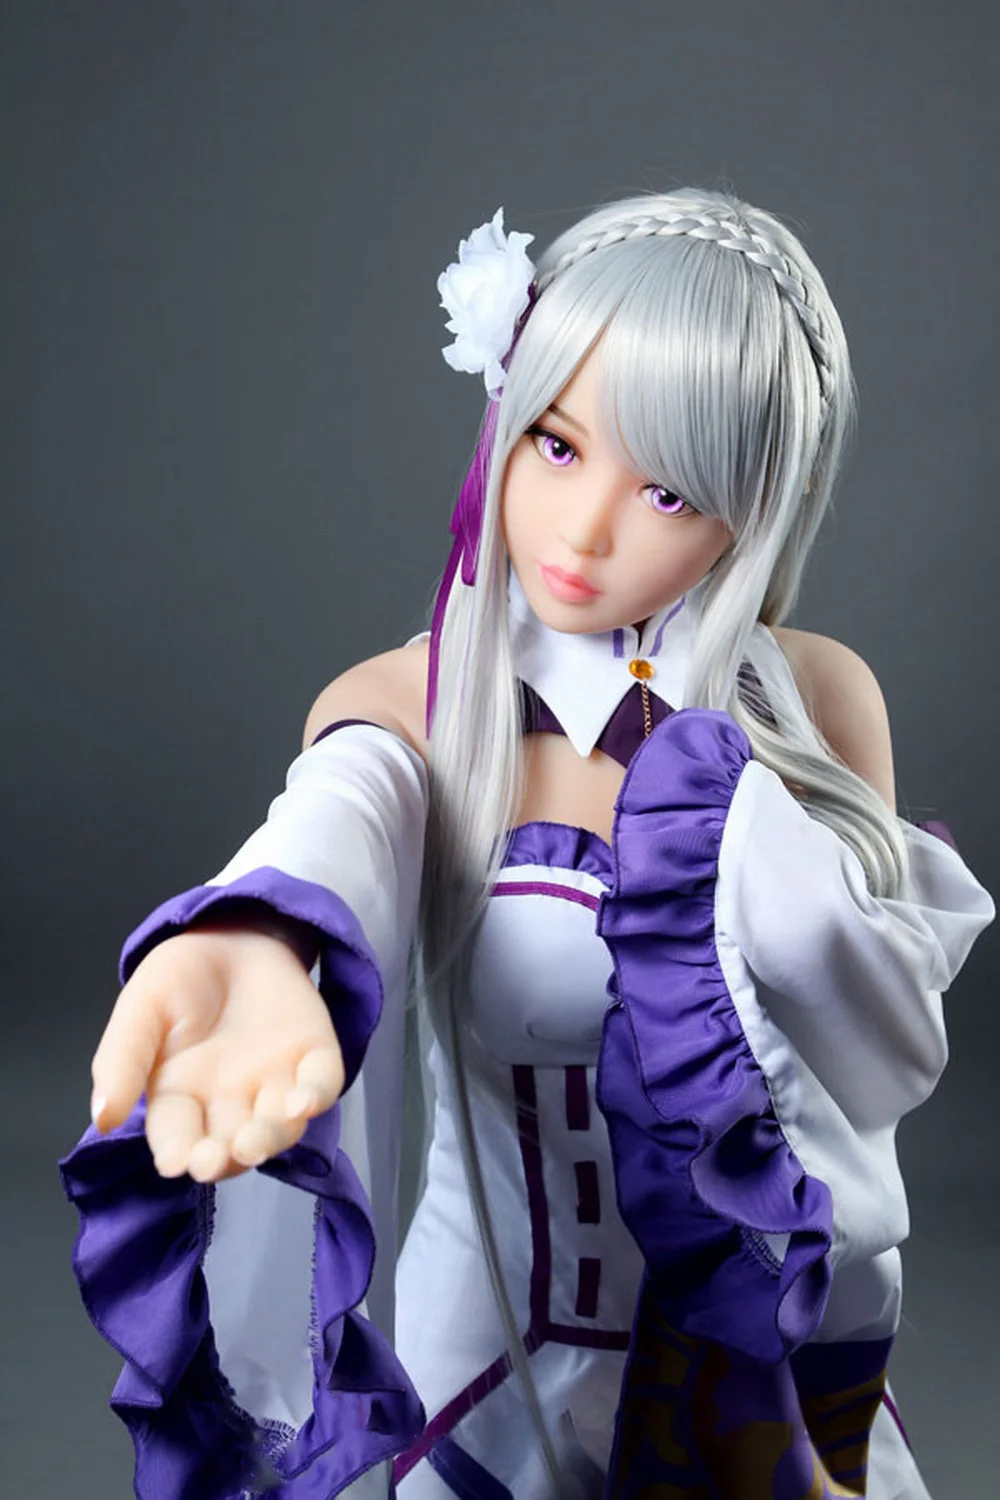 Anime sex doll with one hand asking for something